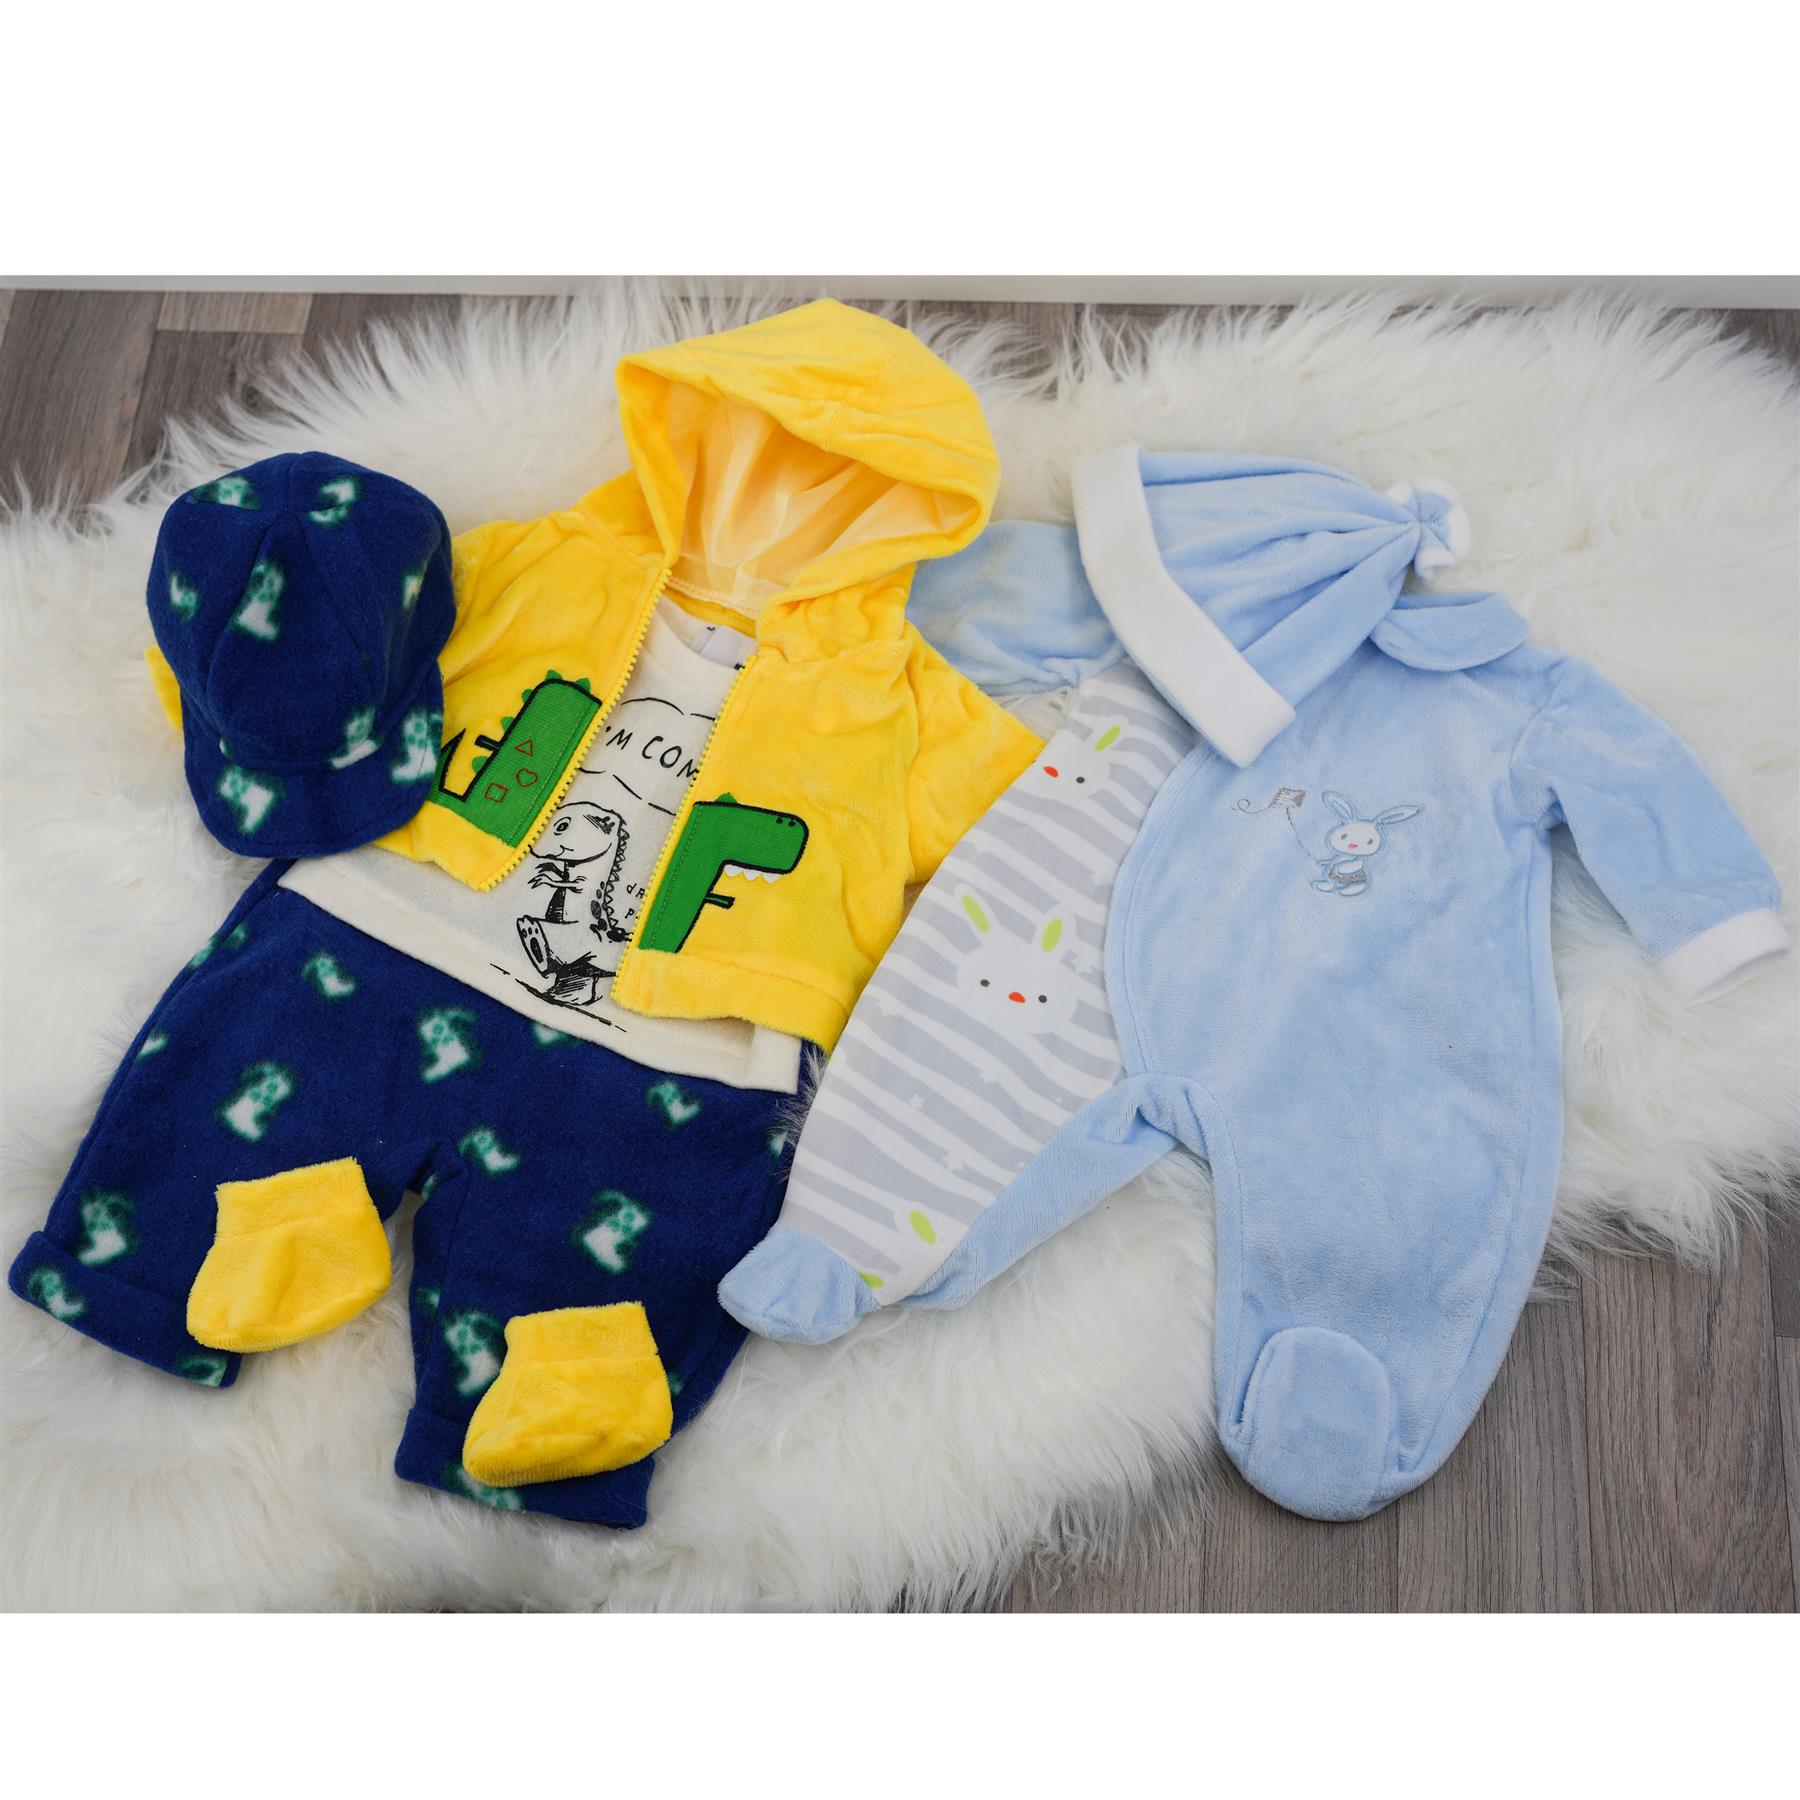 20” Boy Doll Clothes Set of 2 - Blue/Yellow by BiBi Doll - The Magic Toy Shop